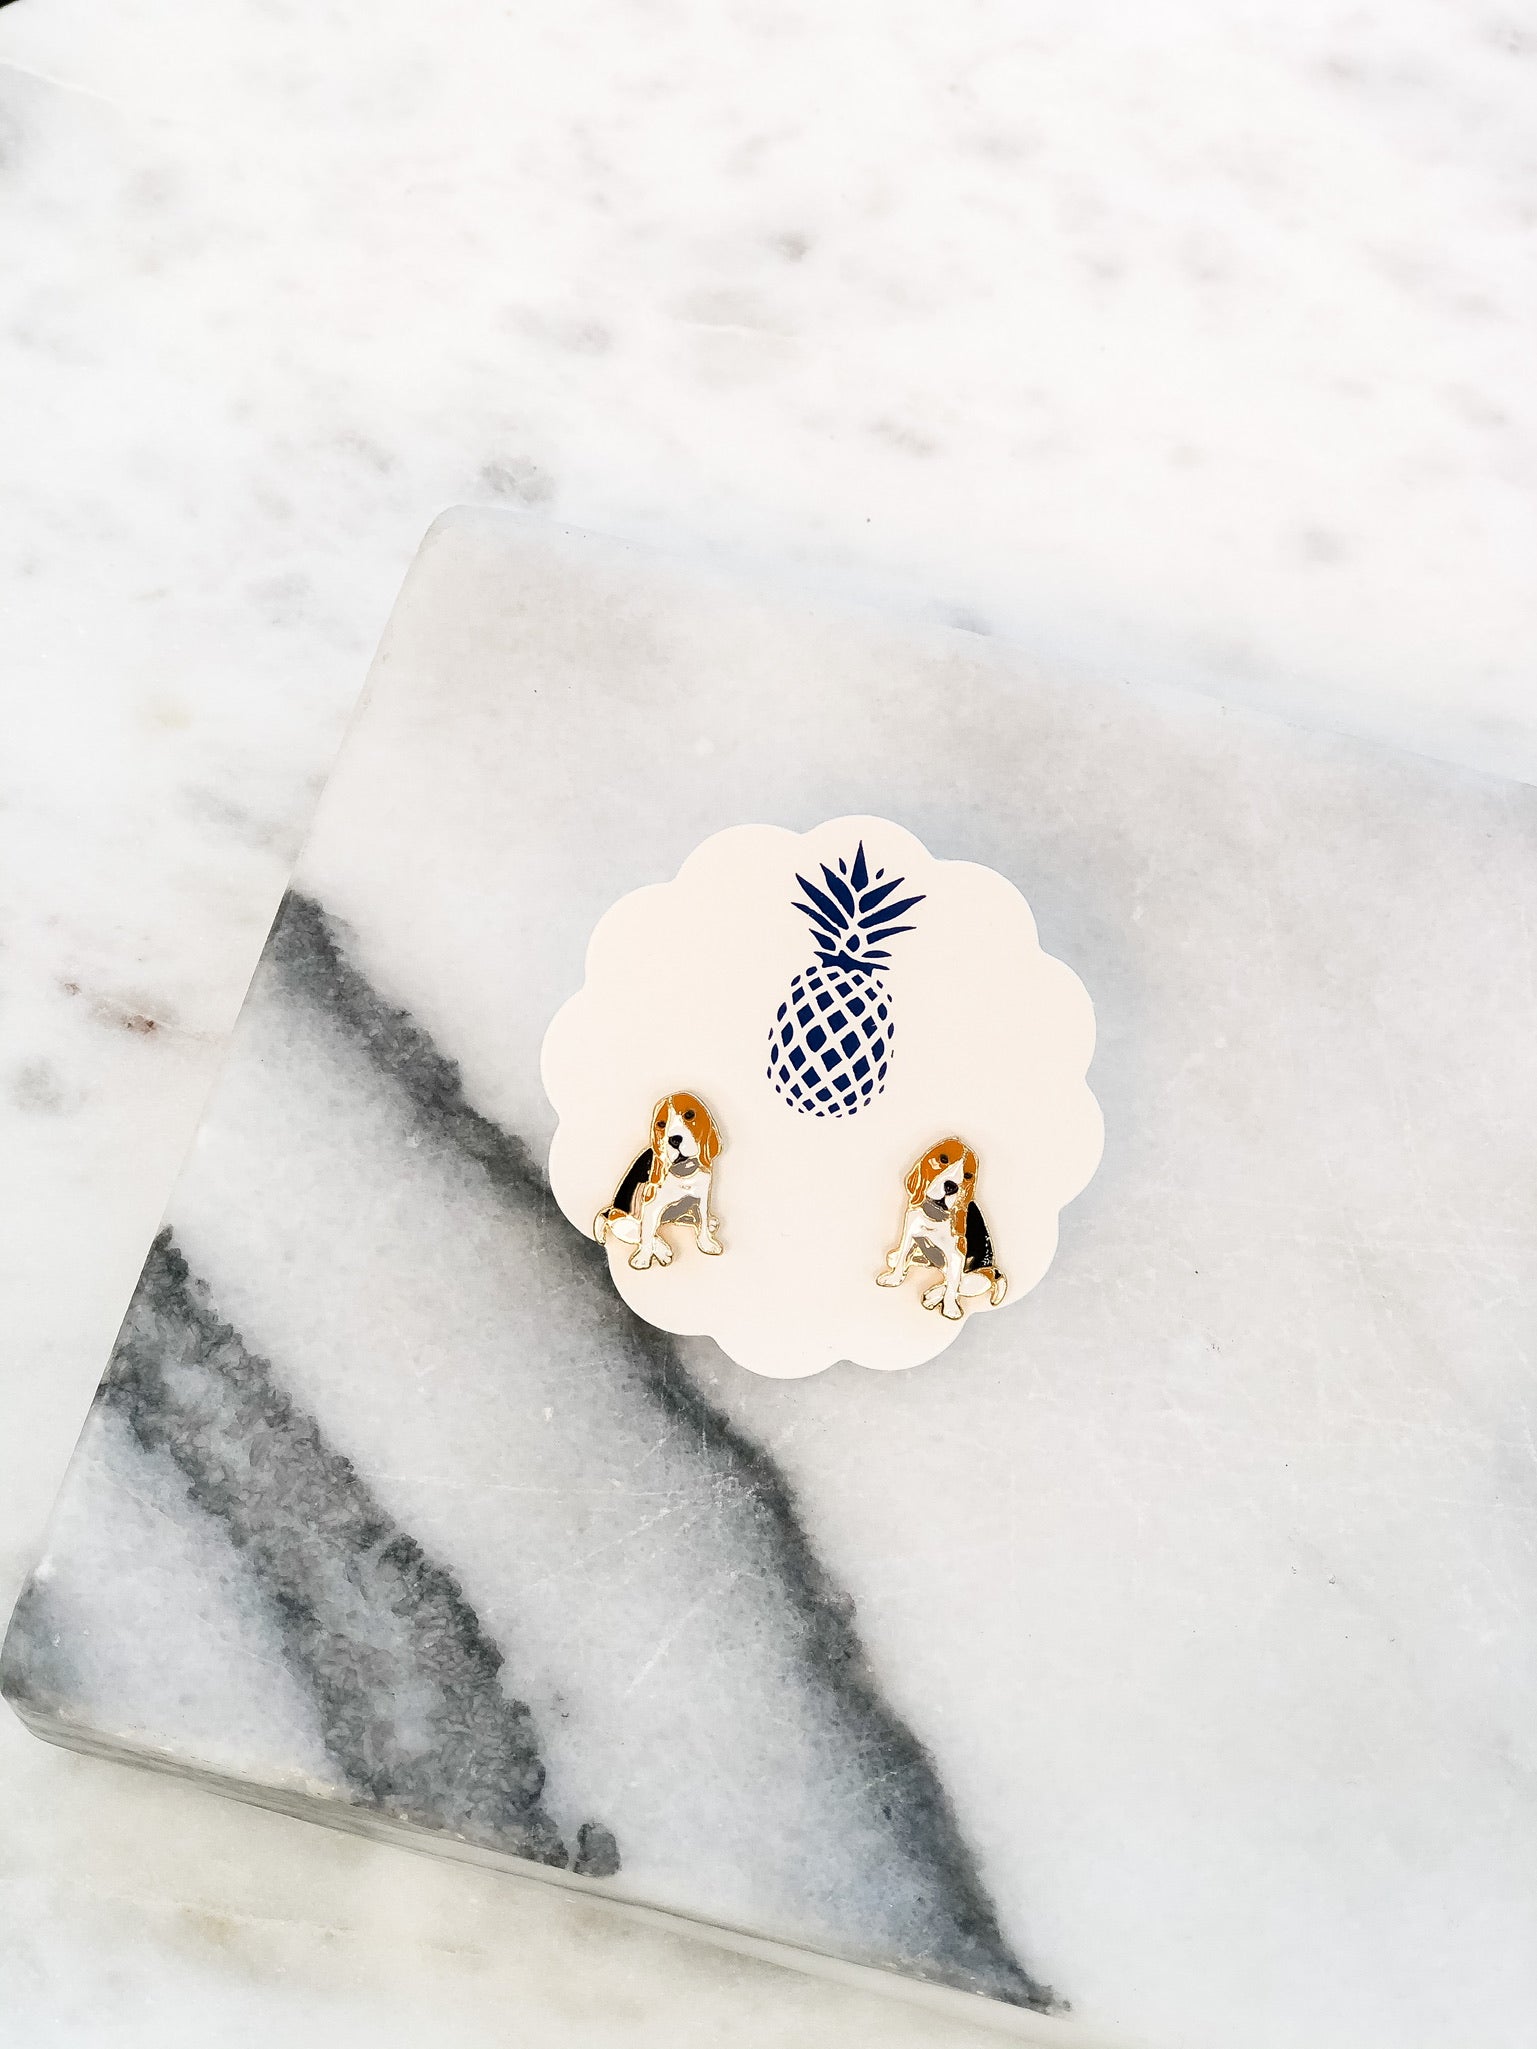 Signature Pet Enamel Studs by Prep Obsessed - Hound